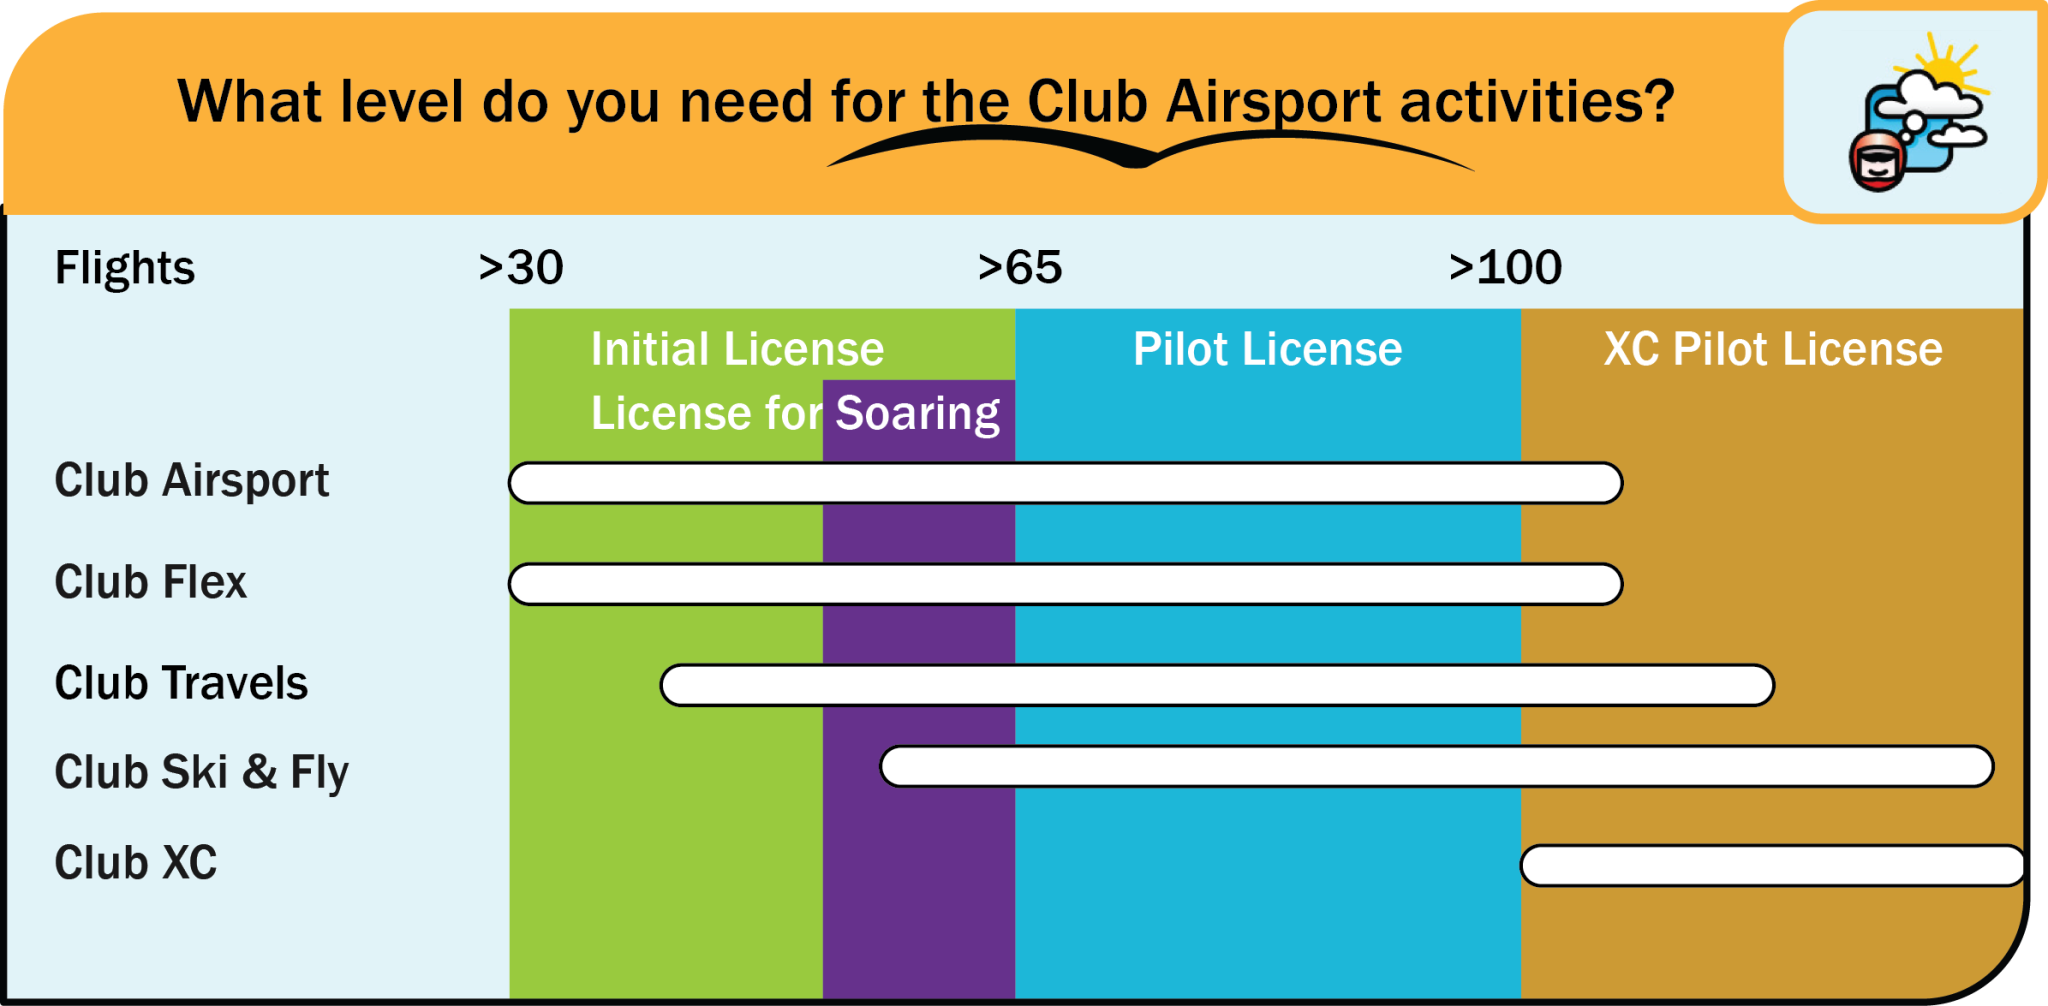 What level do you need for the Club Airsport activities?